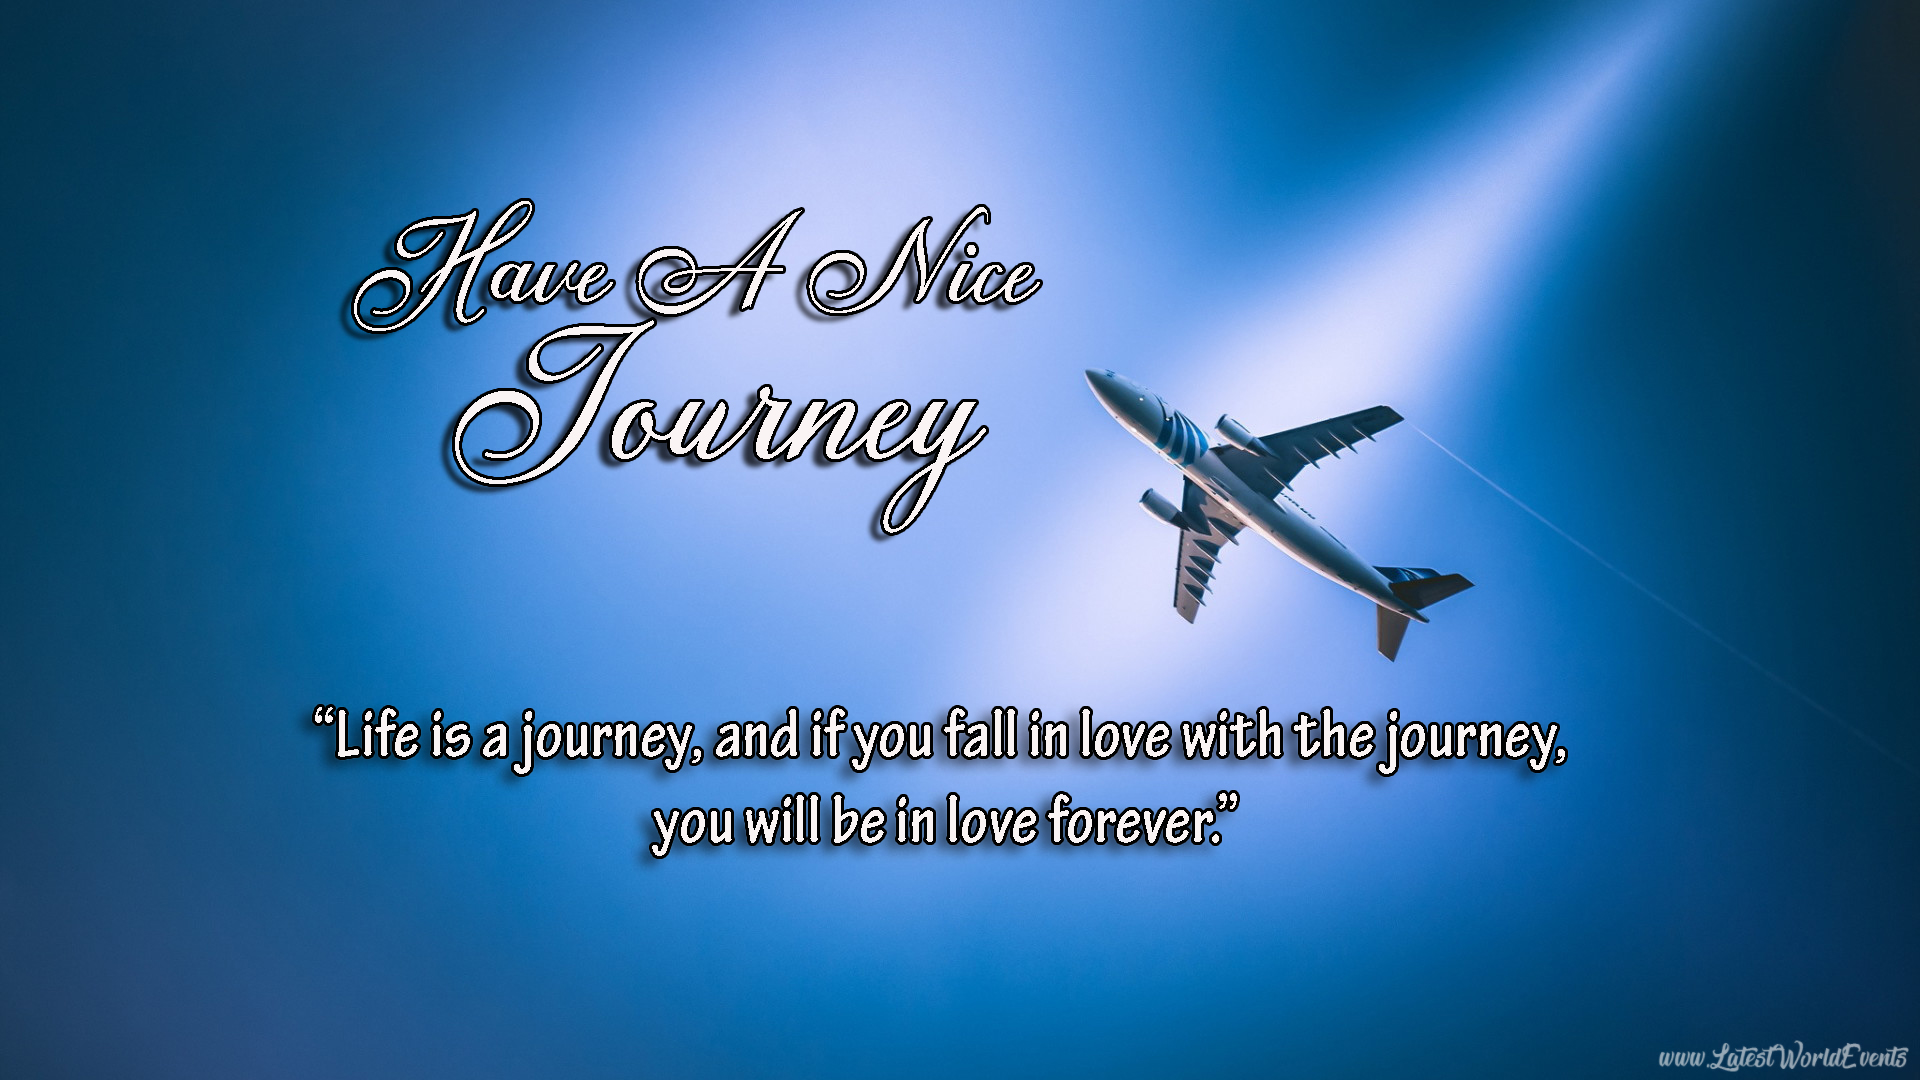 Famous-safe-journey-wishes-quotes